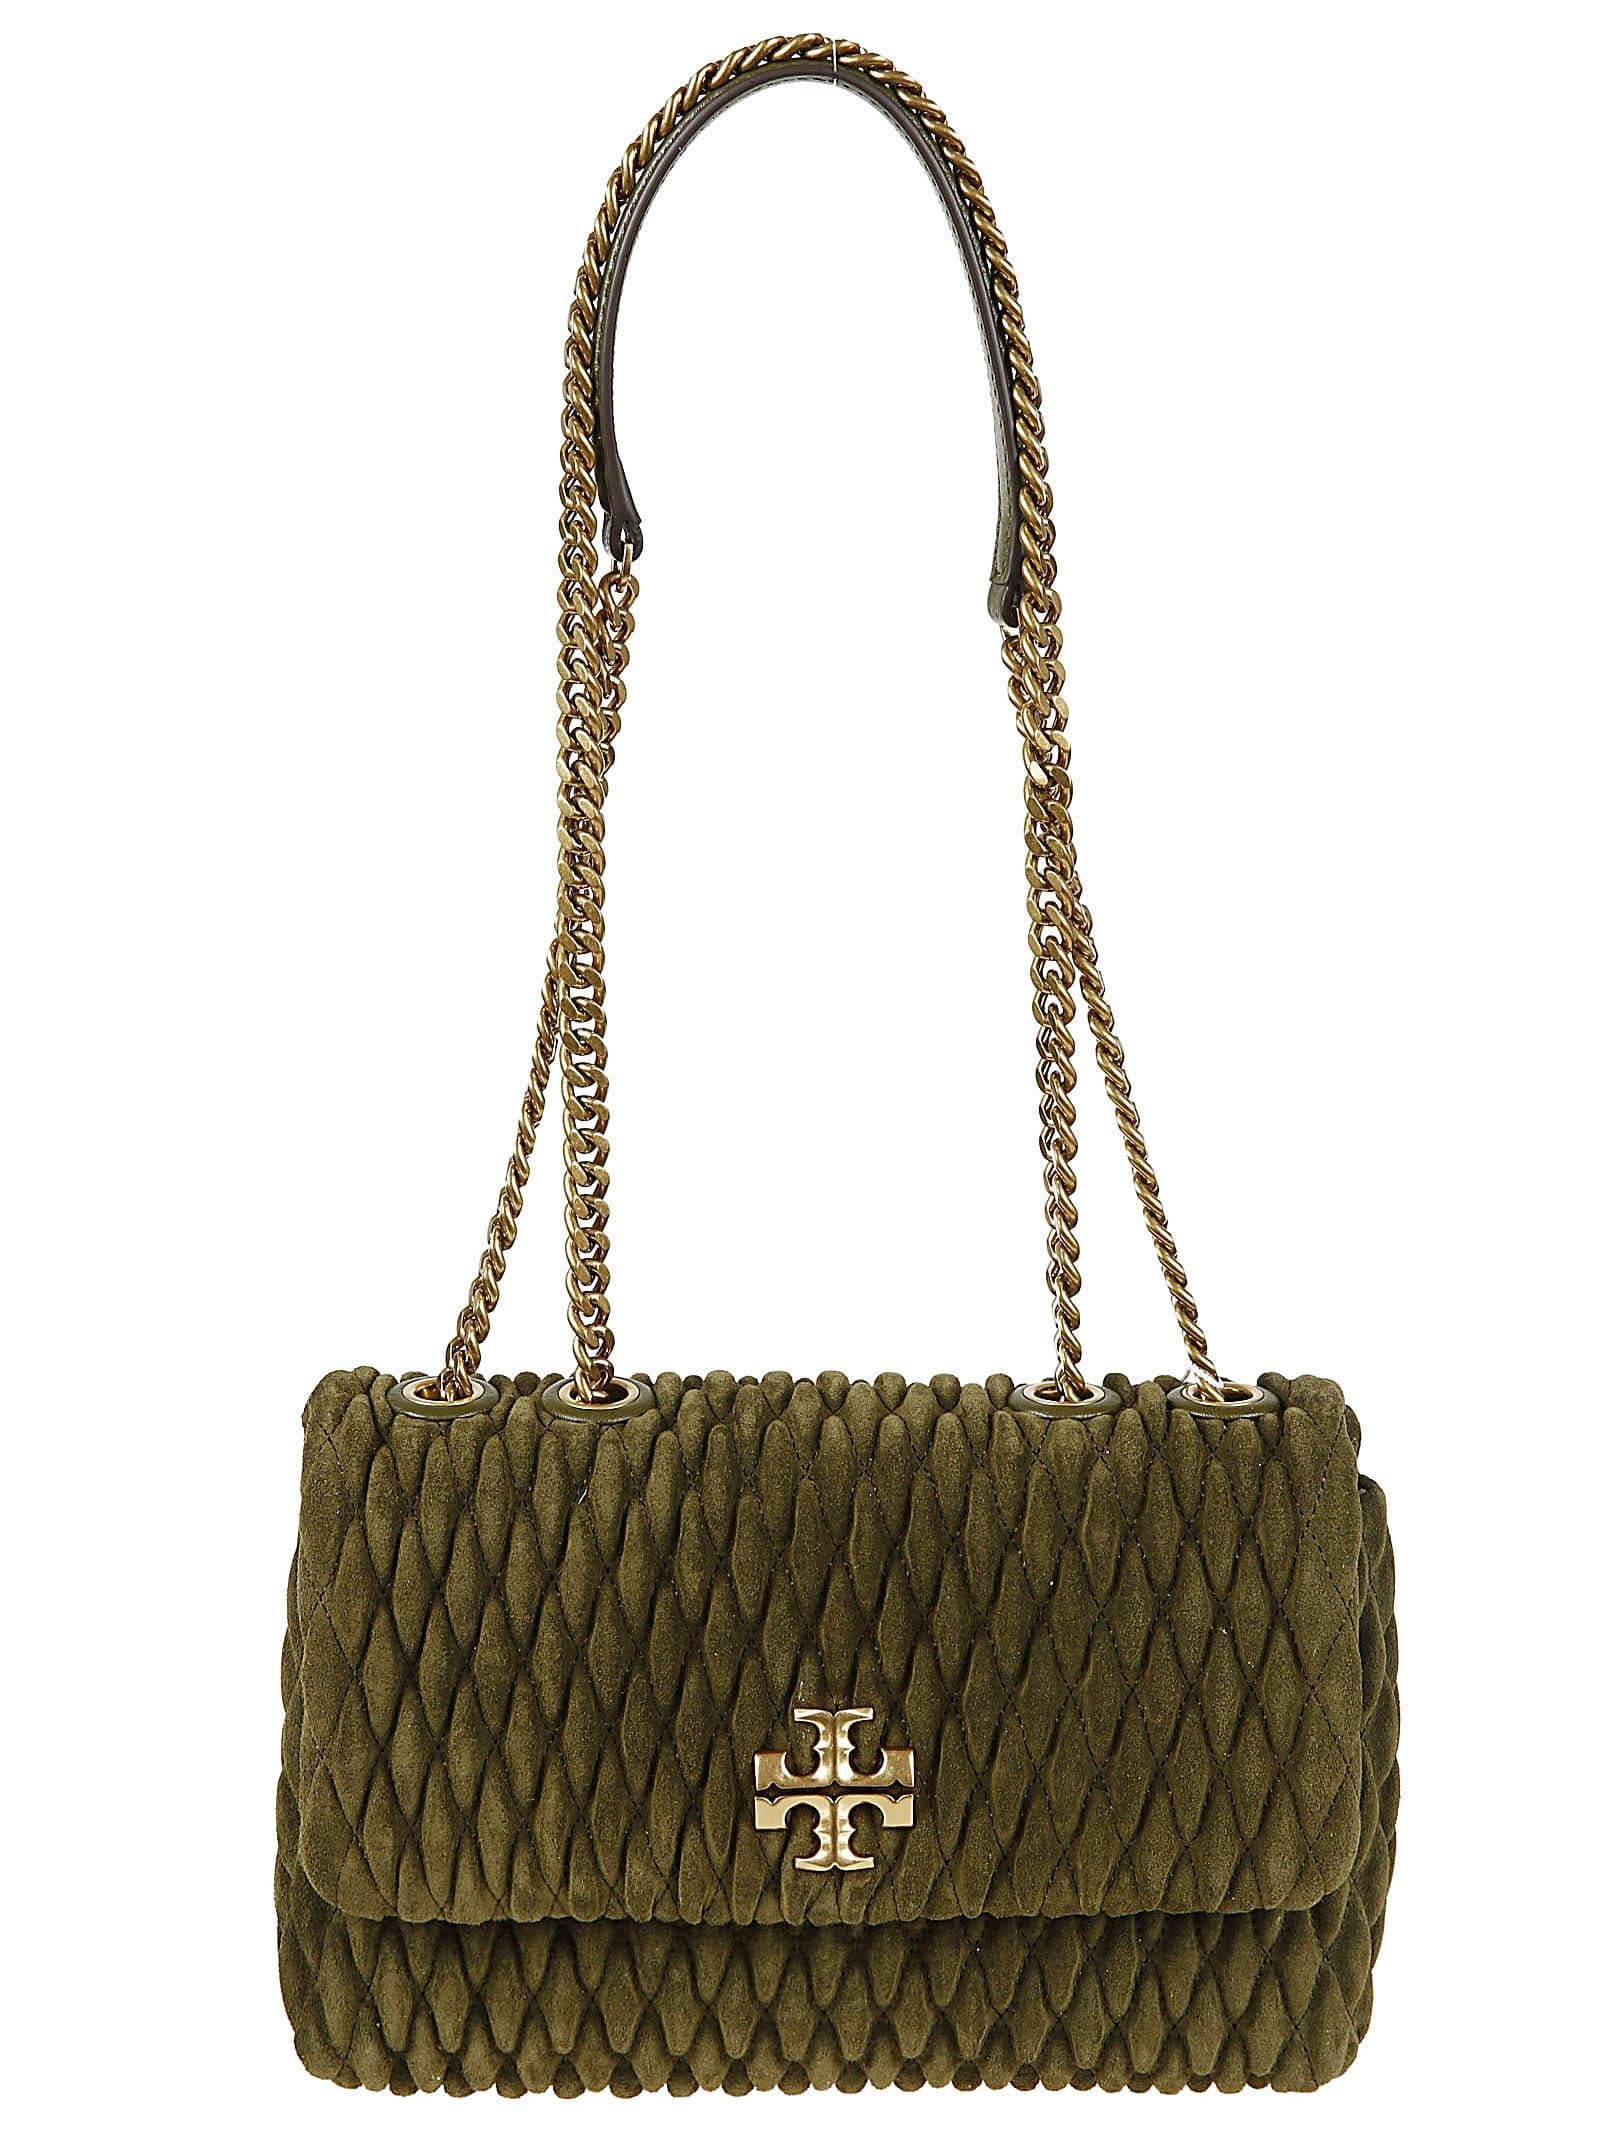 Tory Burch Kira Suede Ruched Small Convertible Shoulder Bag in Green | Lyst